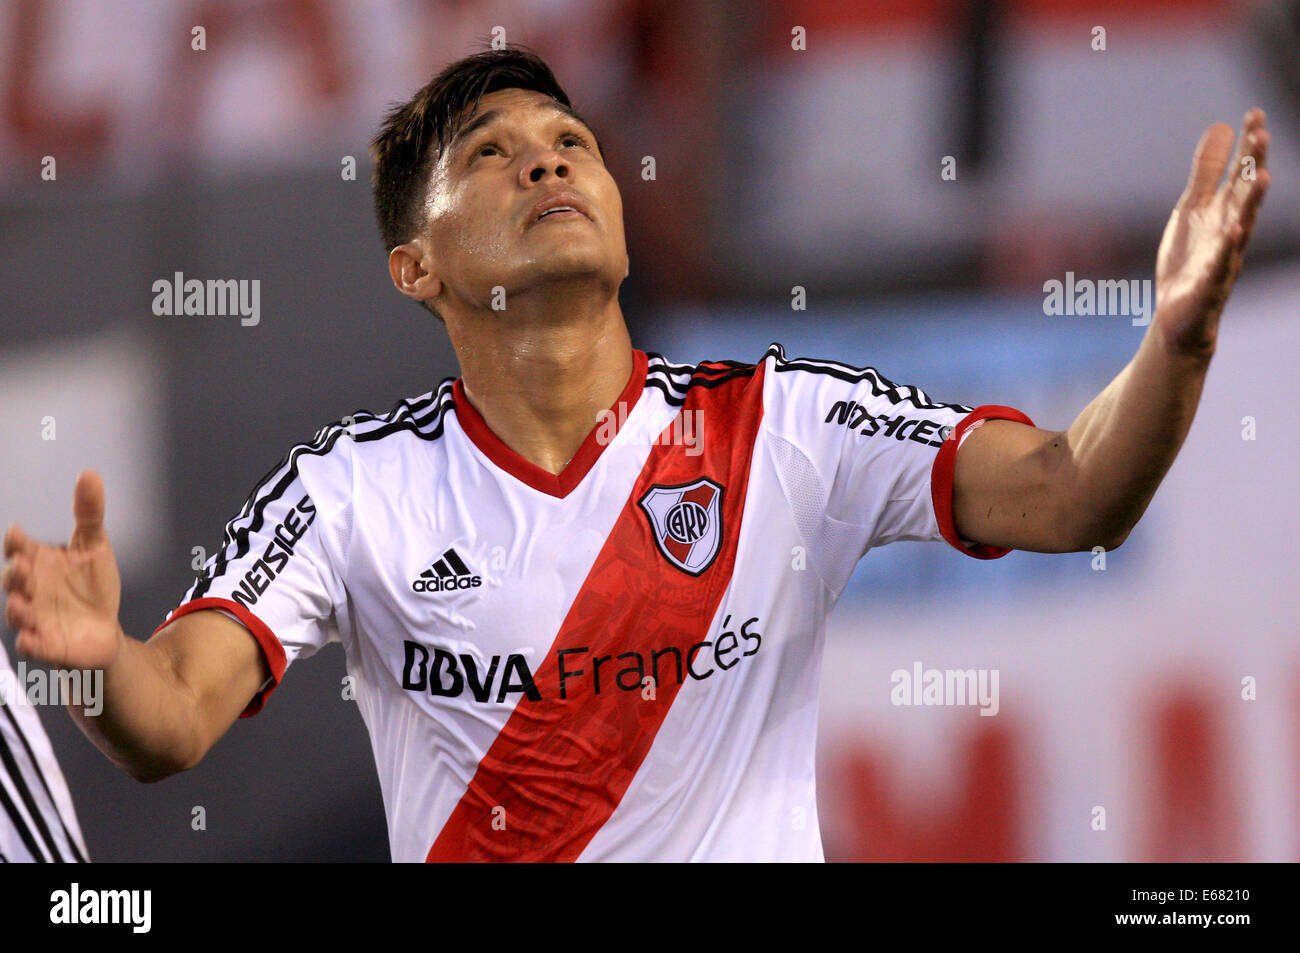 Buenos Aires, Argentina. 17th Aug, 2014. Teofilo Gutierrez of River Plate celebrates a goal during the match of week 2 of the First Division of Argentinean Soccer Tournament against Rosario Central, in the Antonio Vespucio Liberti Stadium, in the city of Buenos Aires, capital of Argentina, on Aug. 17, 2014. Credit:  Martin Zabala/Xinhua/Alamy Live News Stock Photo